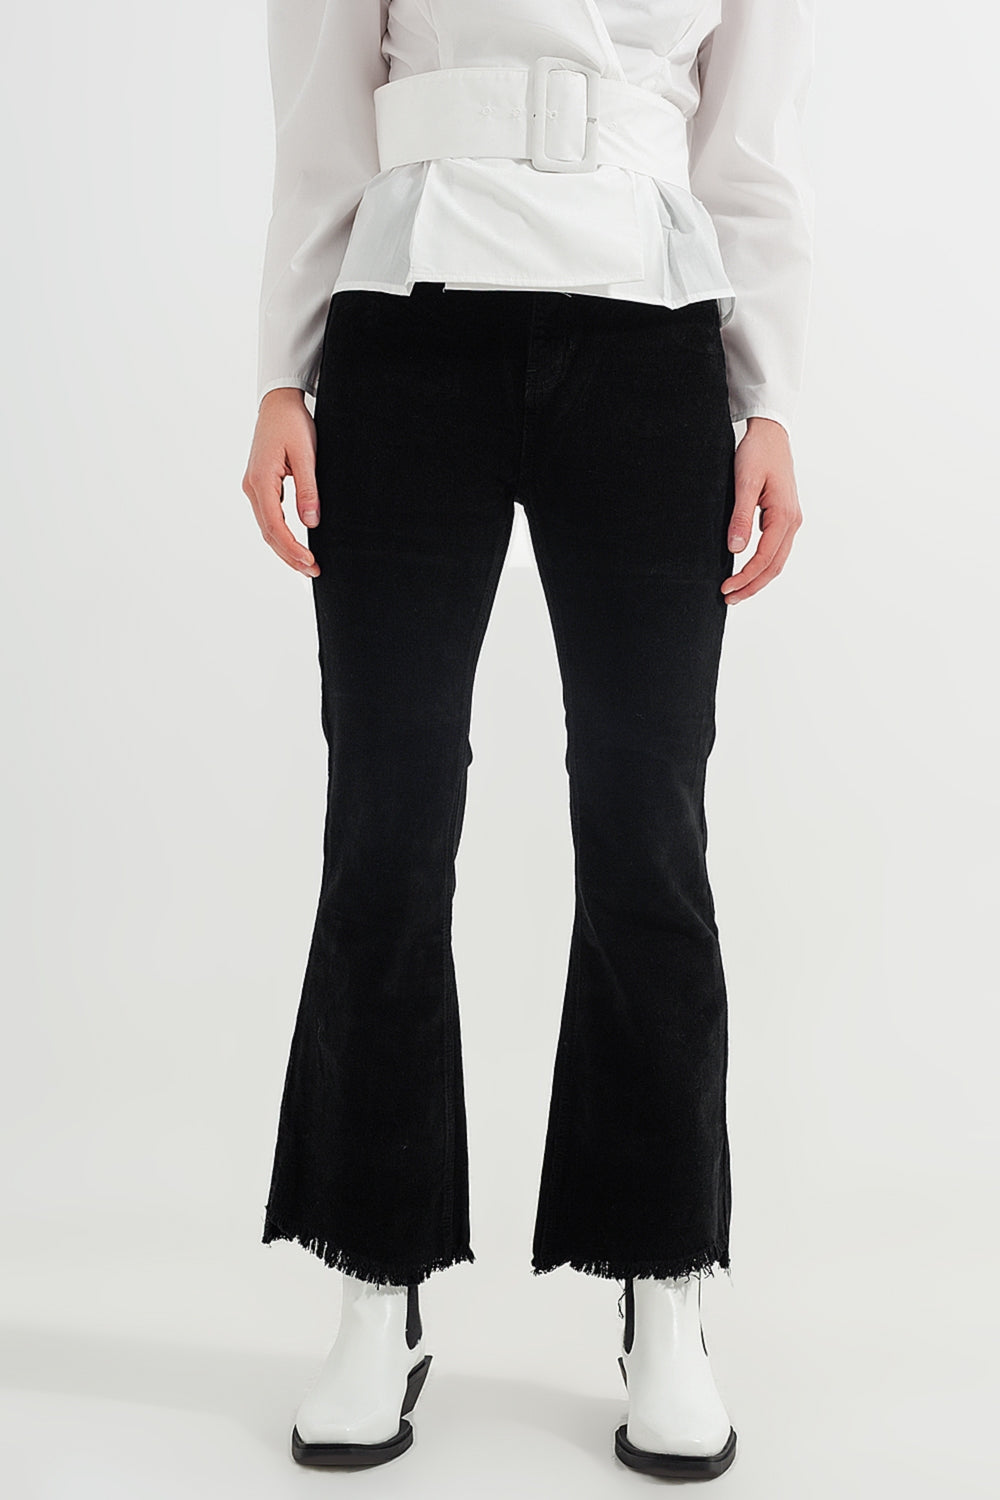 Q2 Stretchy cord flared trouser in black